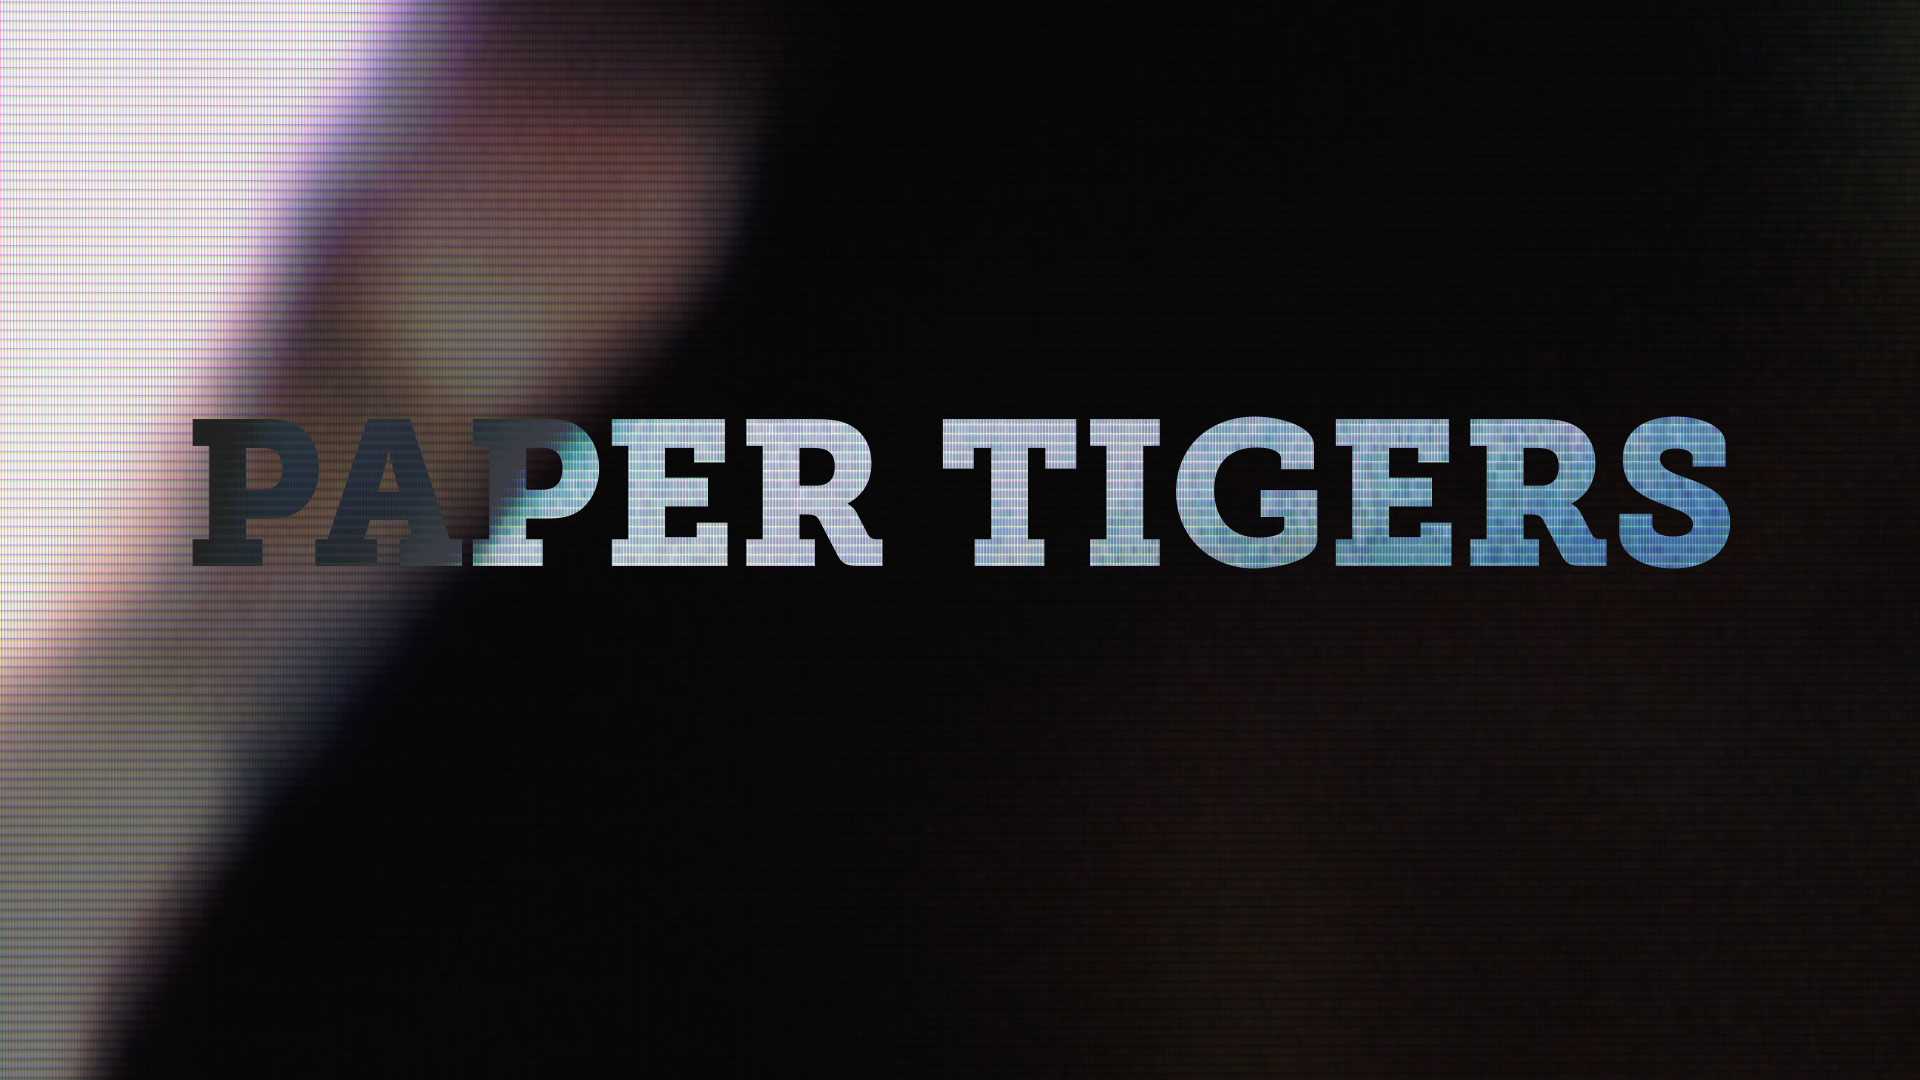 paper tigers movie review